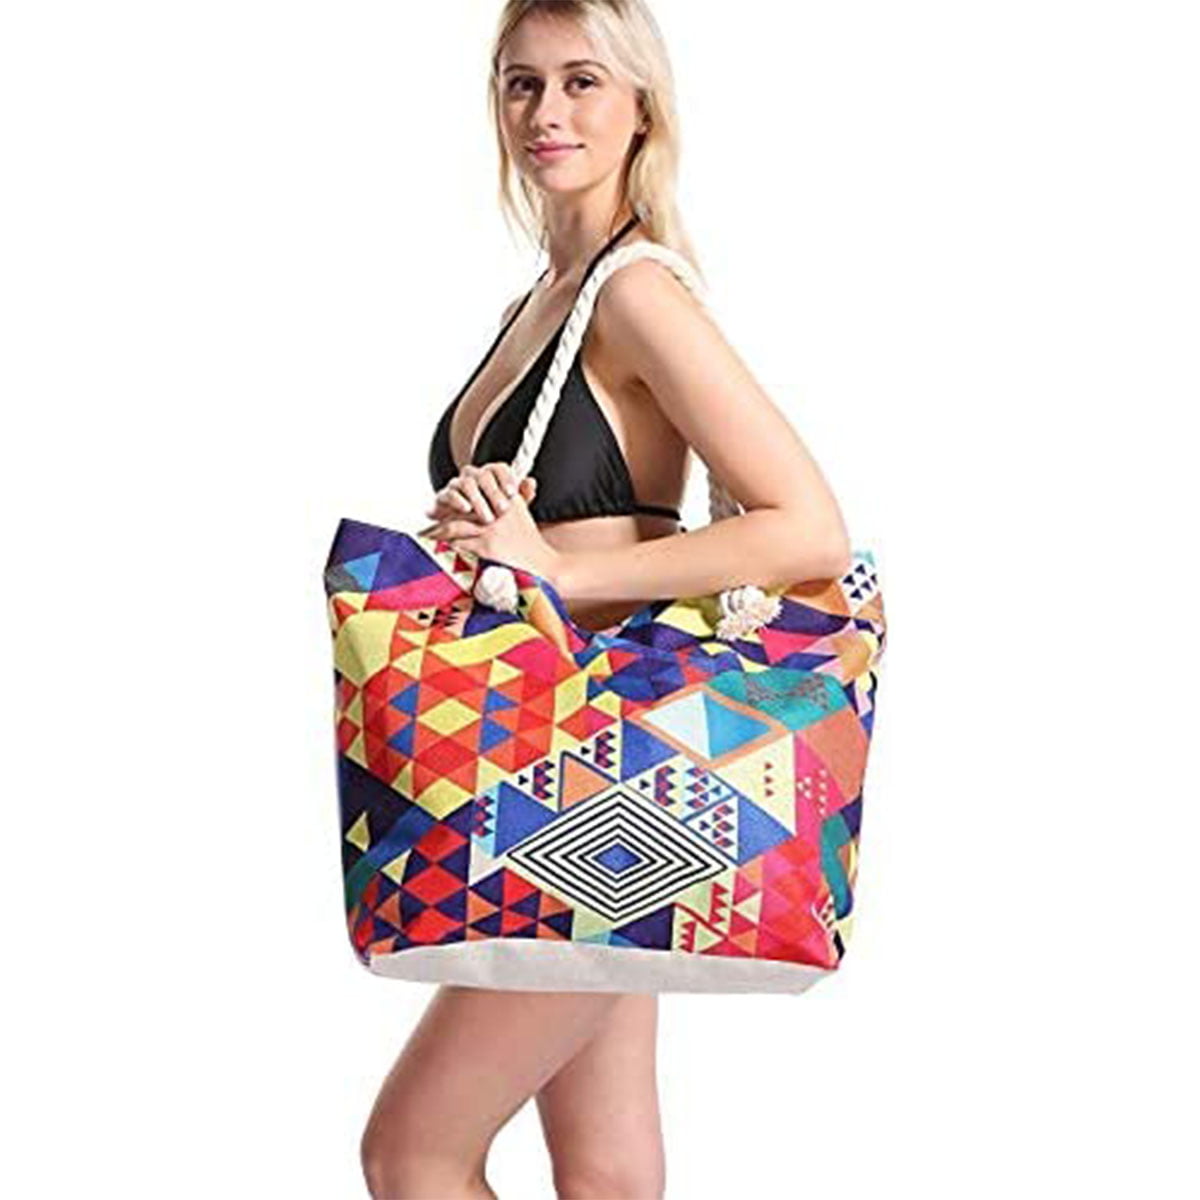 Wangy Oversized Big Beach & Pool Bags Large Waterproof Canvas Beach Bag for Toys, Women's